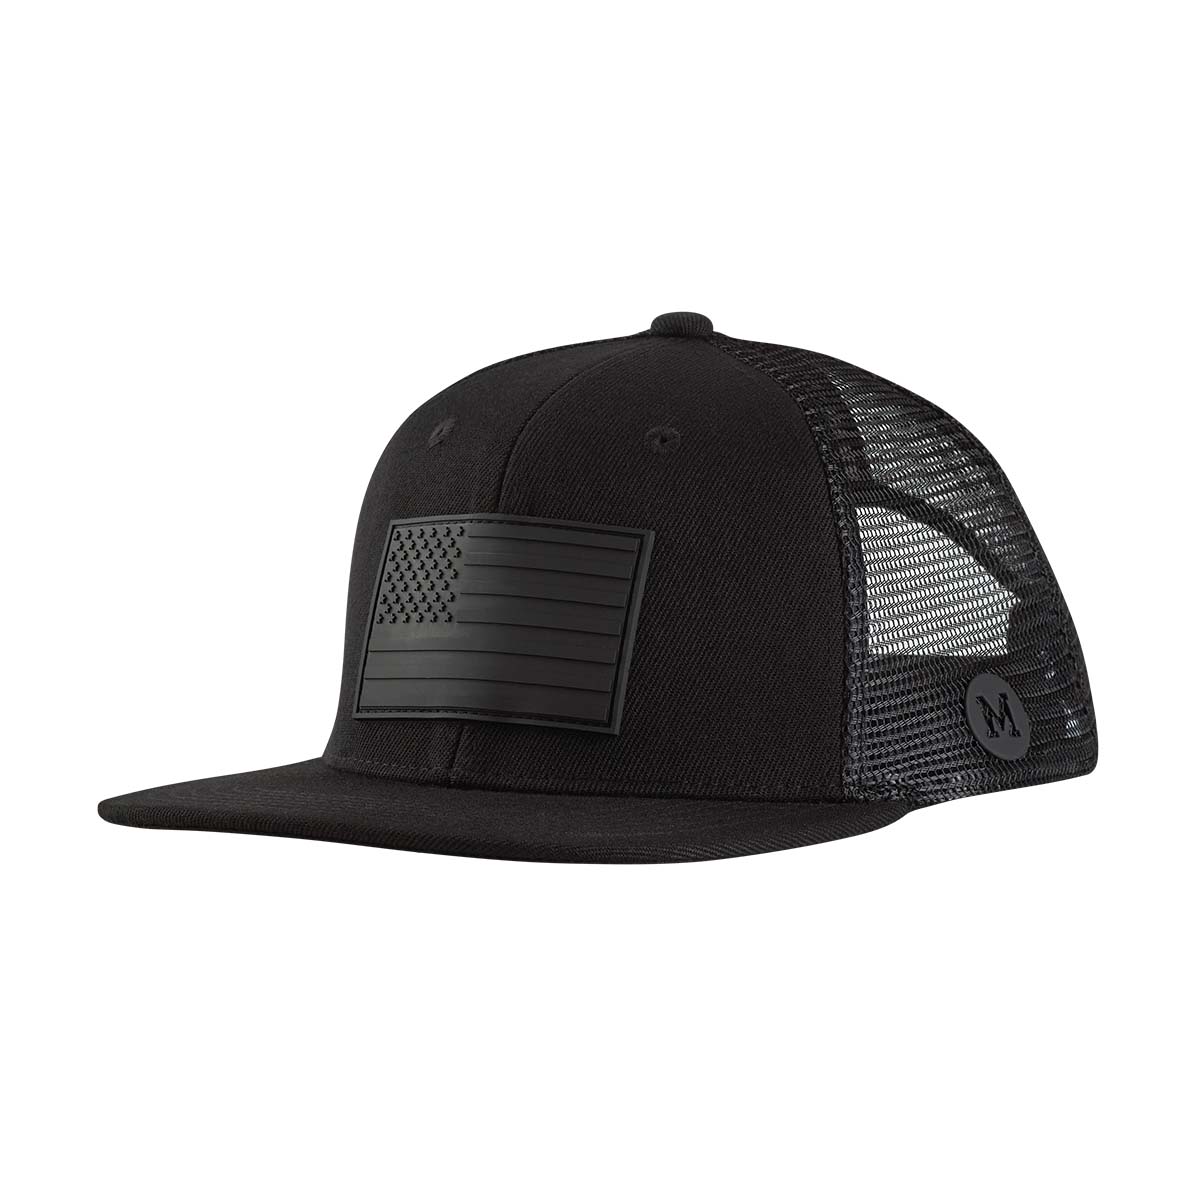 Premium Hats and Accessories - Elevate Your Style Tagged 